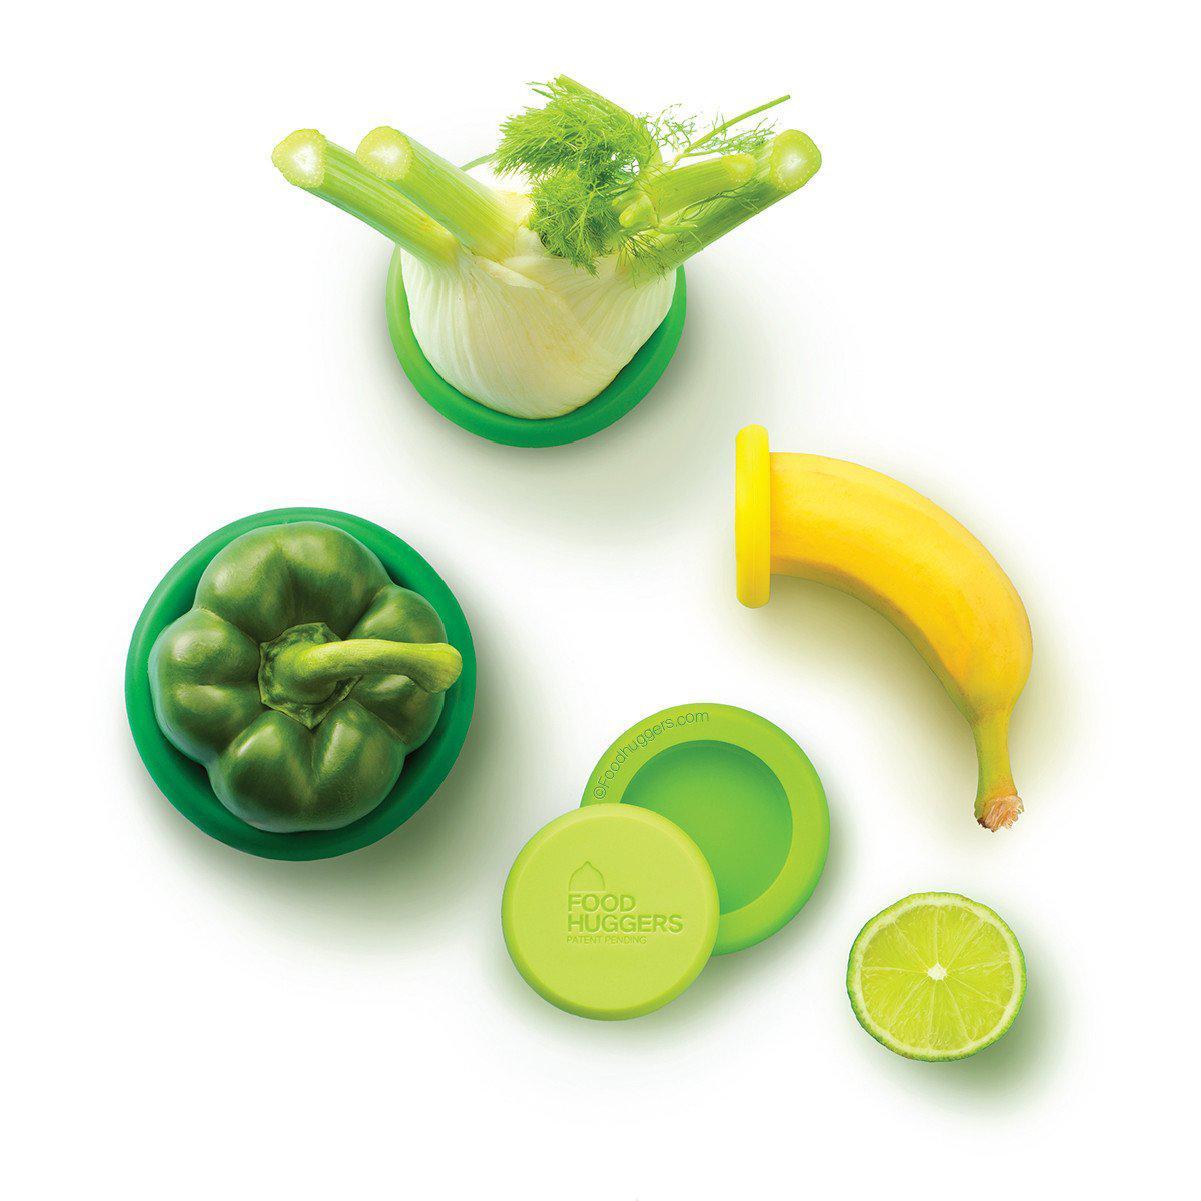 Top view of five Food Huggers, preserving fruits and vegetables a smart way to achieve zero waste.